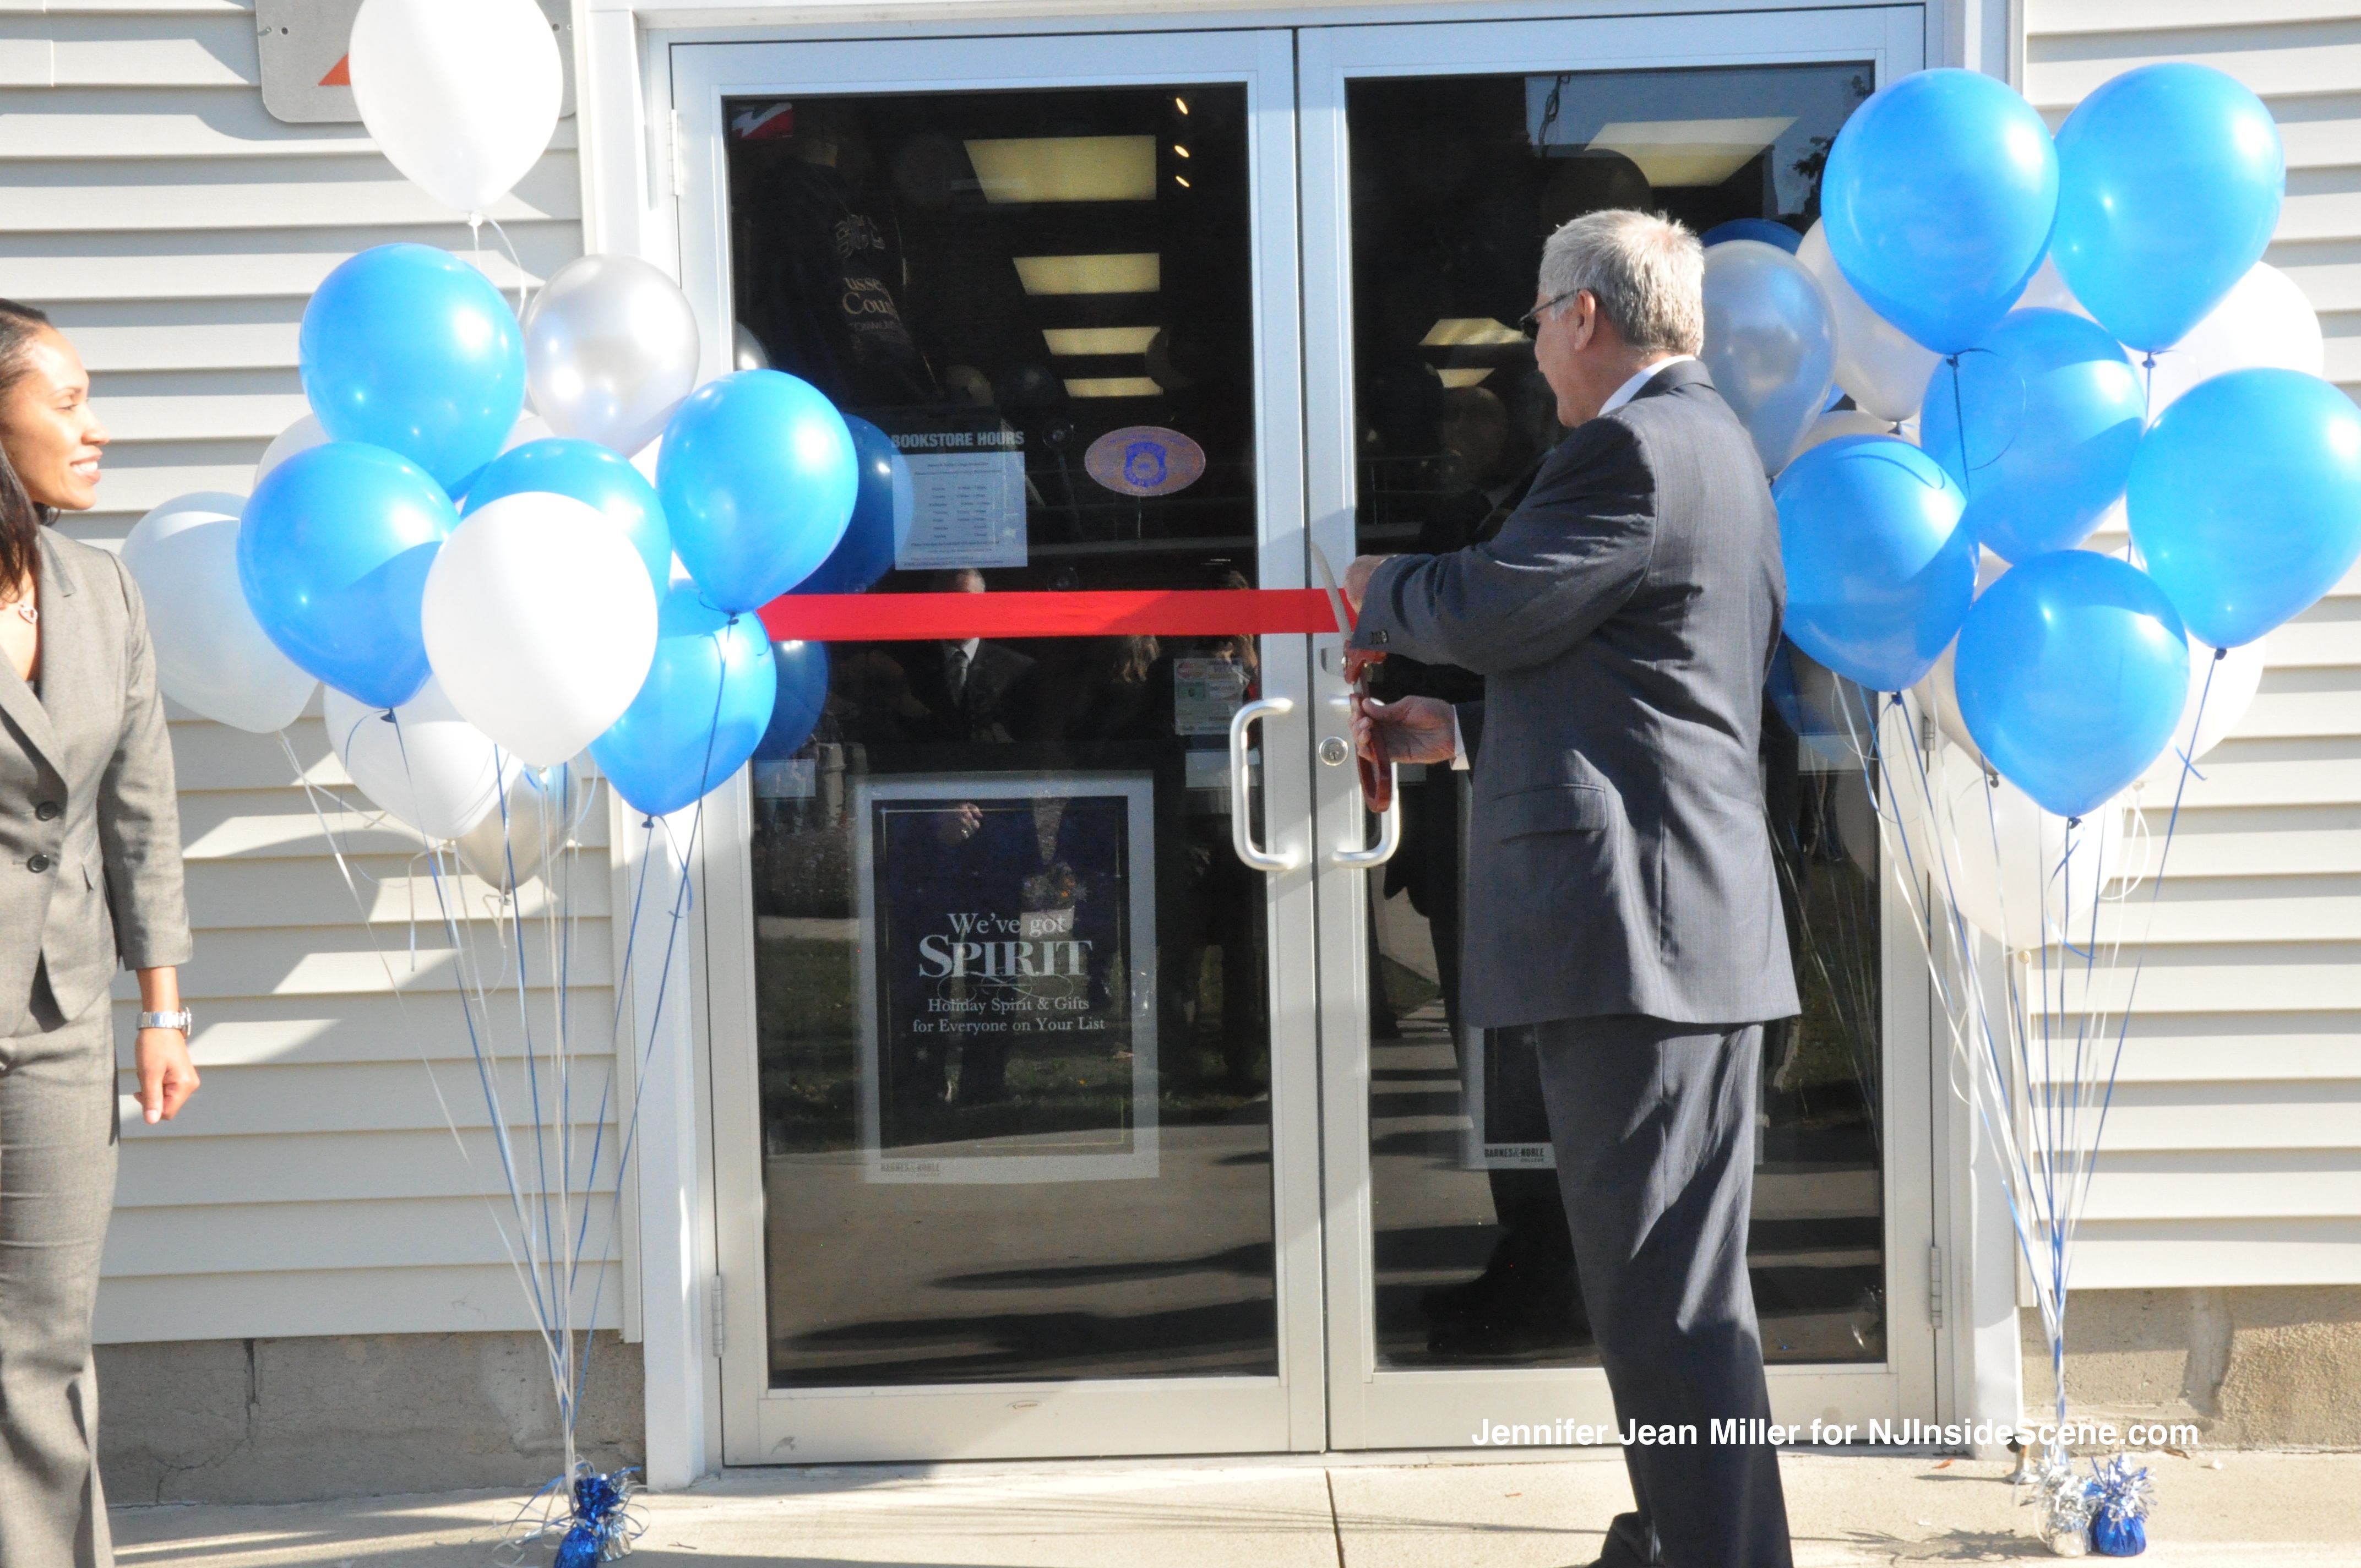 Dr. Paul Mazur cuts the ribbon to the store entrance.